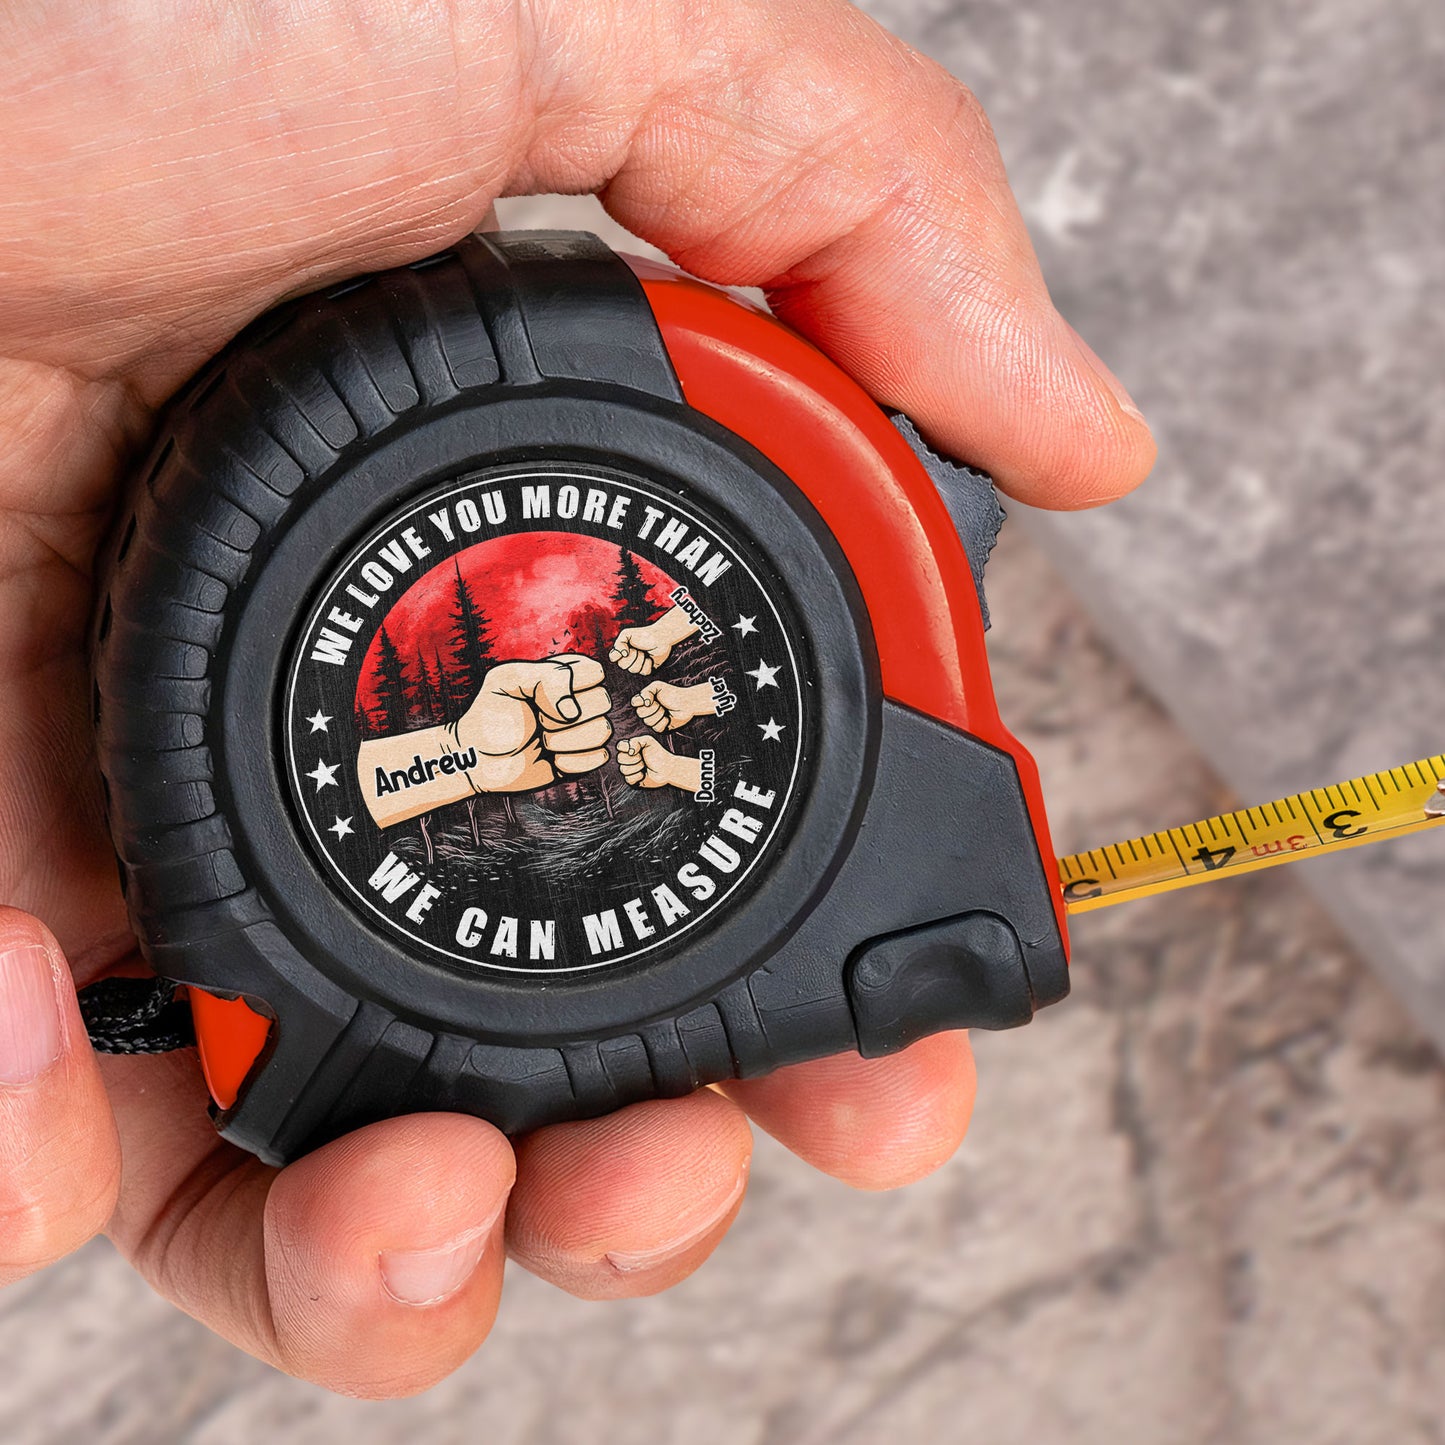 We Love You More Than We Can Measure - Personalized Tape Measure